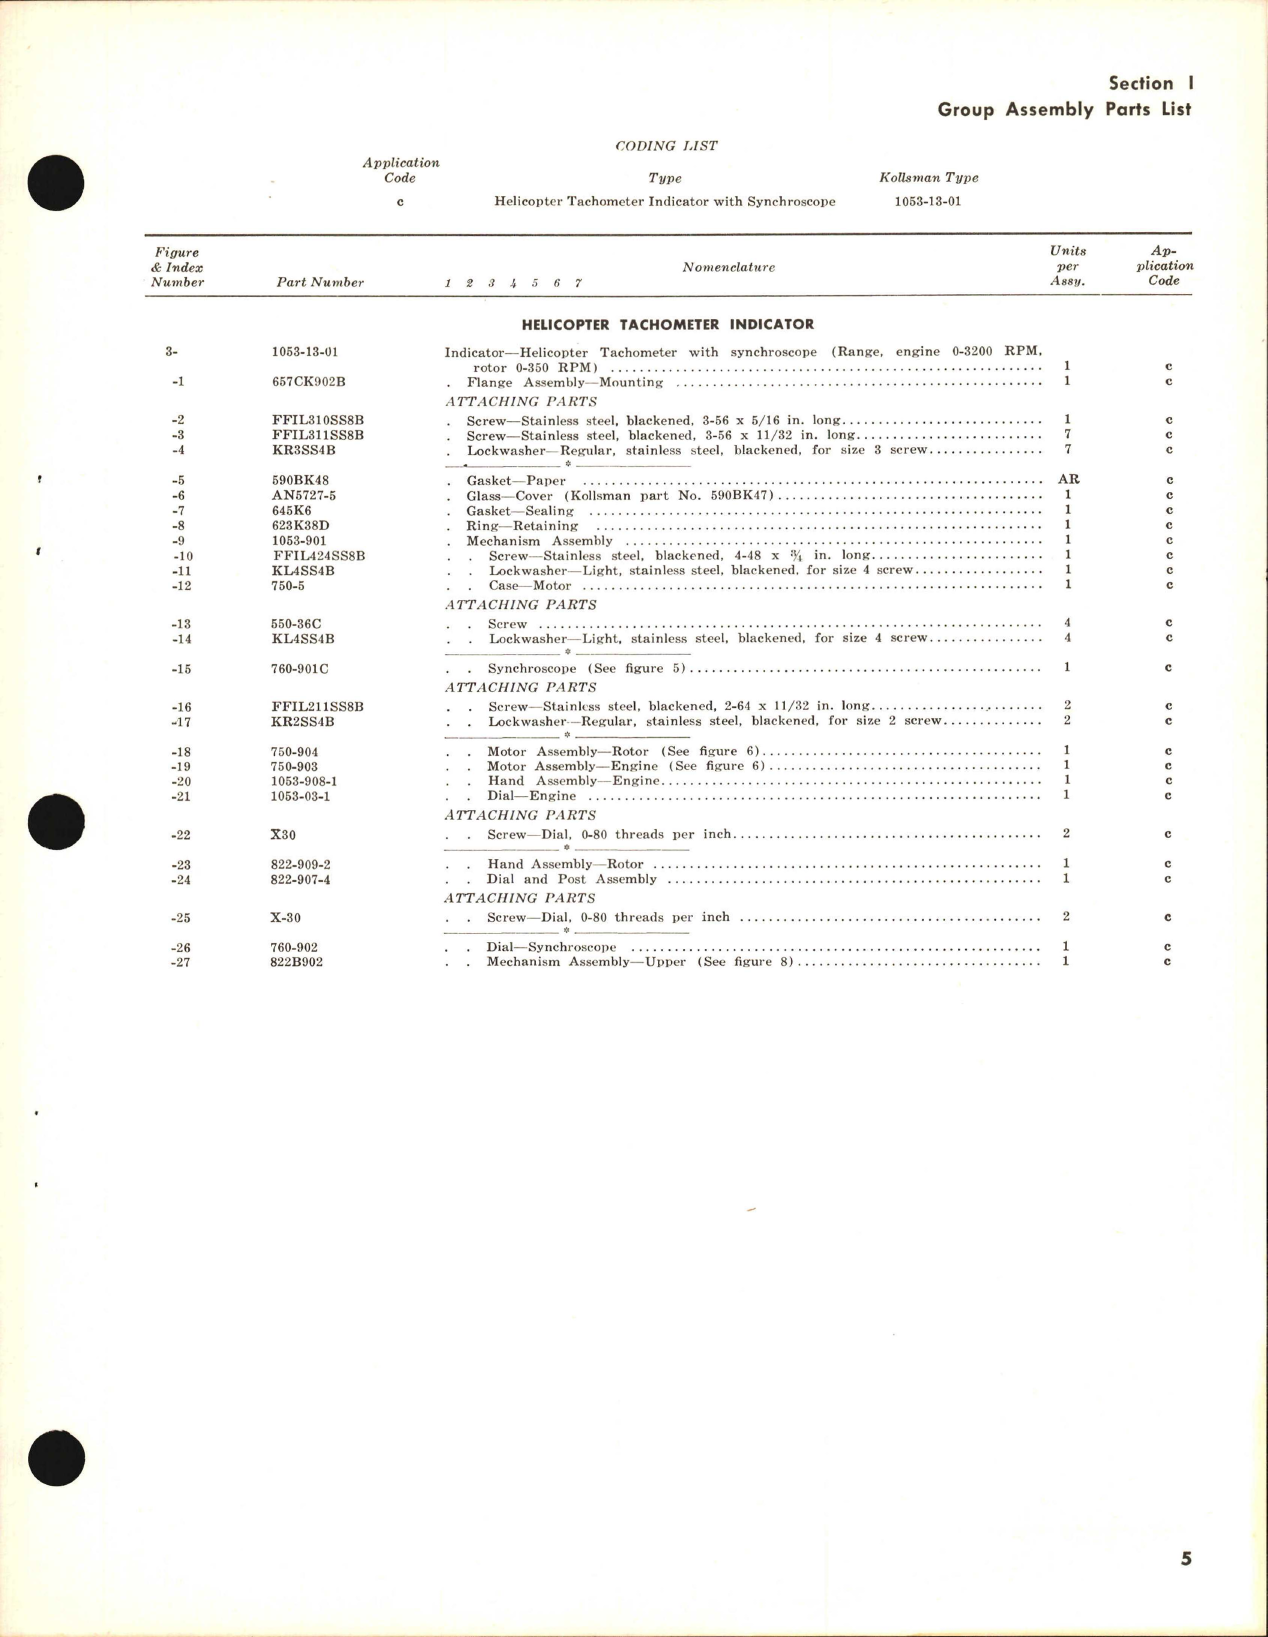 Sample page 5 from AirCorps Library document: Parts Catalog for Kollsman Dual Tachometer Indicators